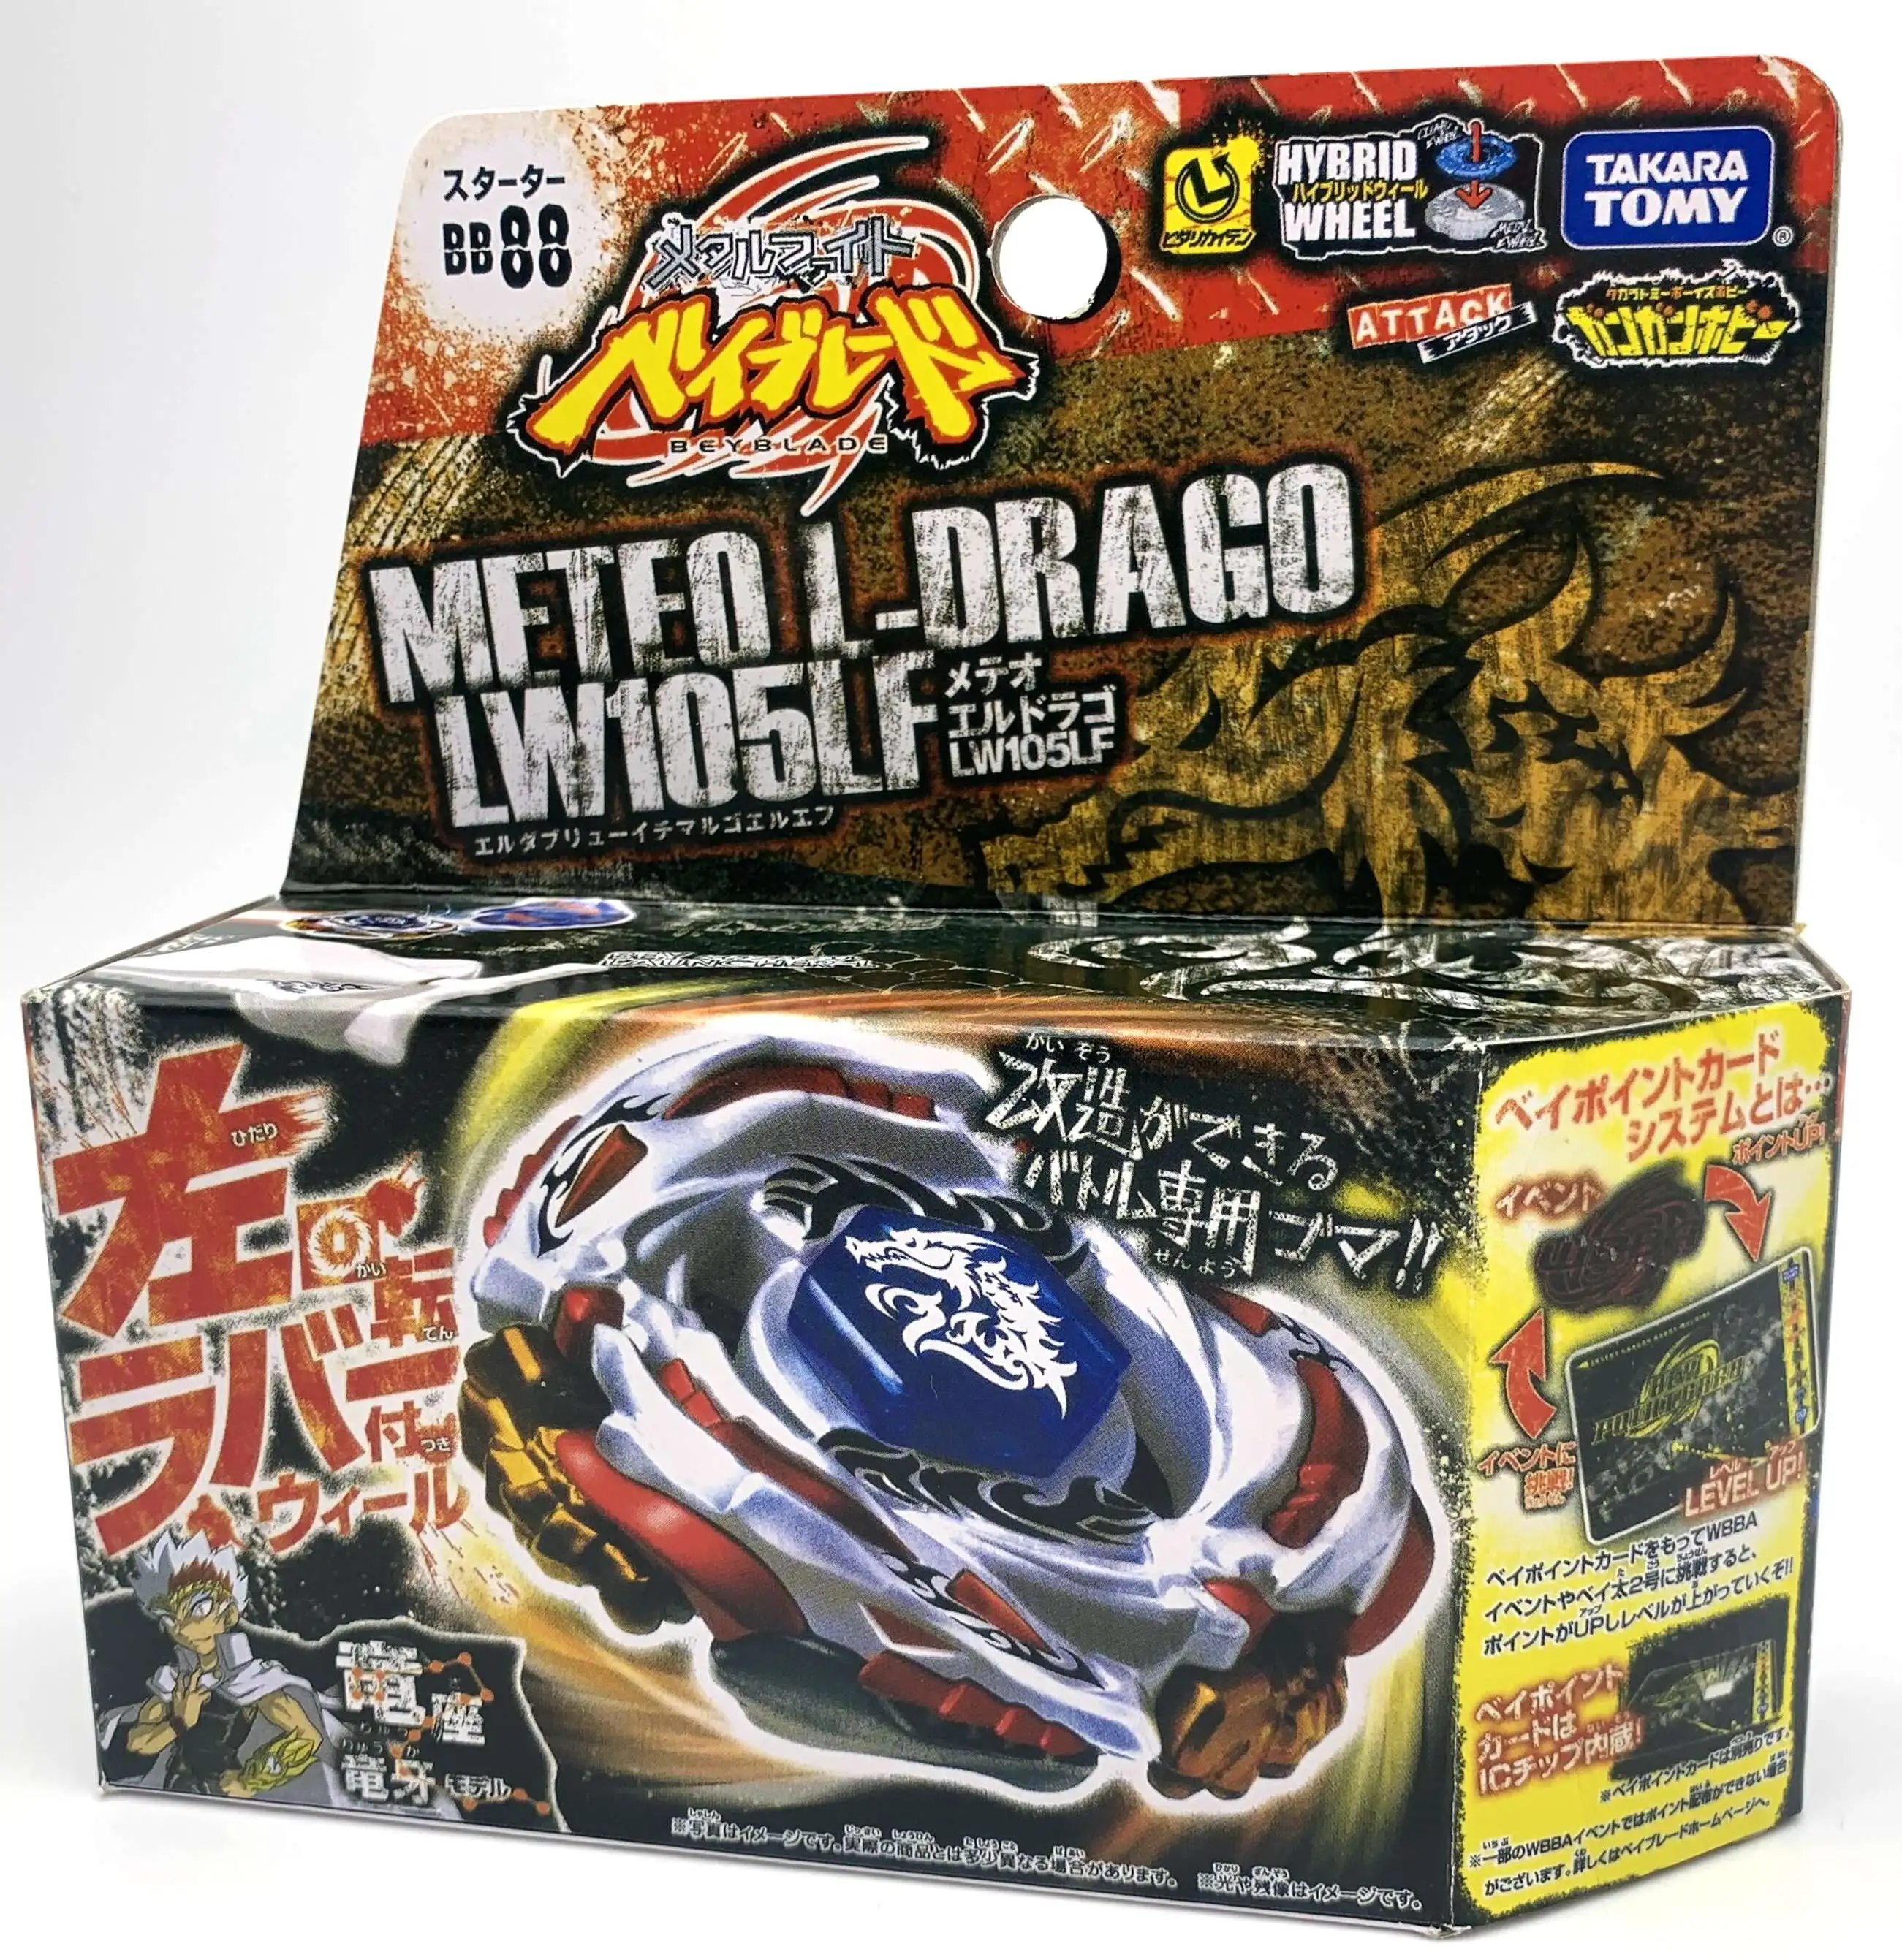 

TAKARA TOMY BEYBLADE METAL FUSION BB-88 Meteo L Drago LW105LF LAUNCHER L for Children's Day Gifts